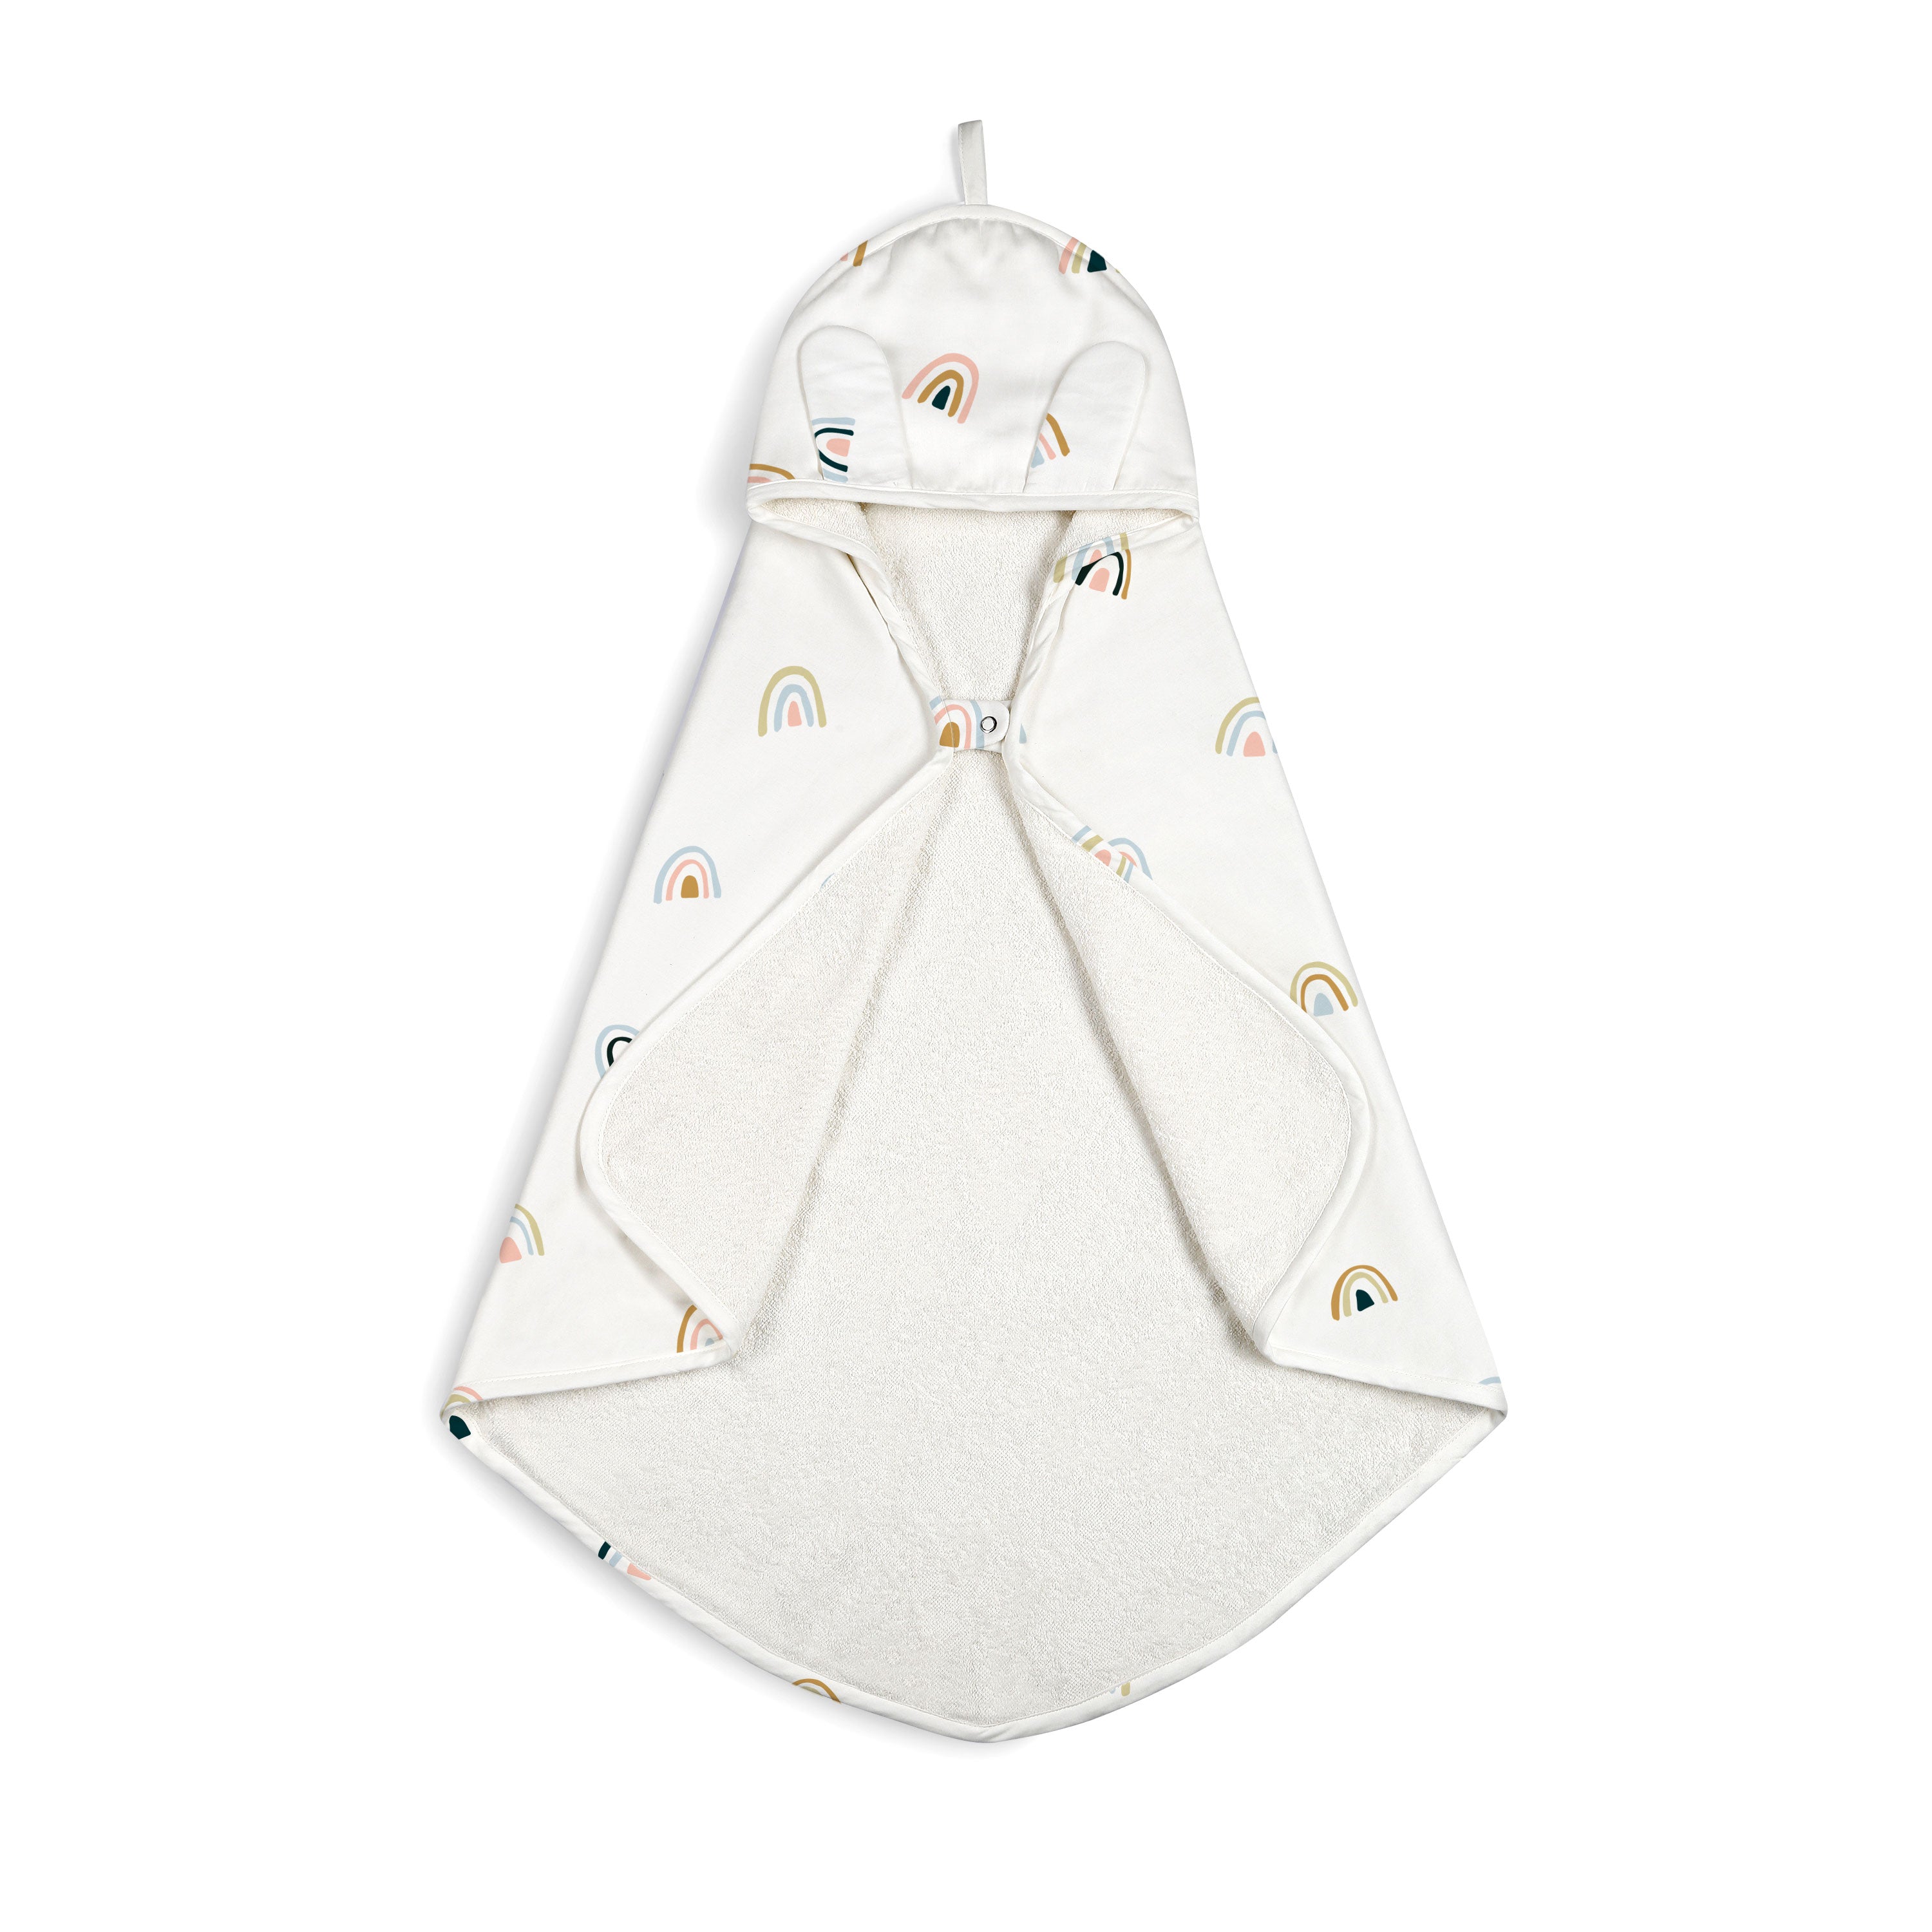 A white Organic Cotton Hooded Baby Towel & Poncho in Rainbow pattern by Makemake Organics is displayed flat against a white background, showcasing its triangular design and snap closures.